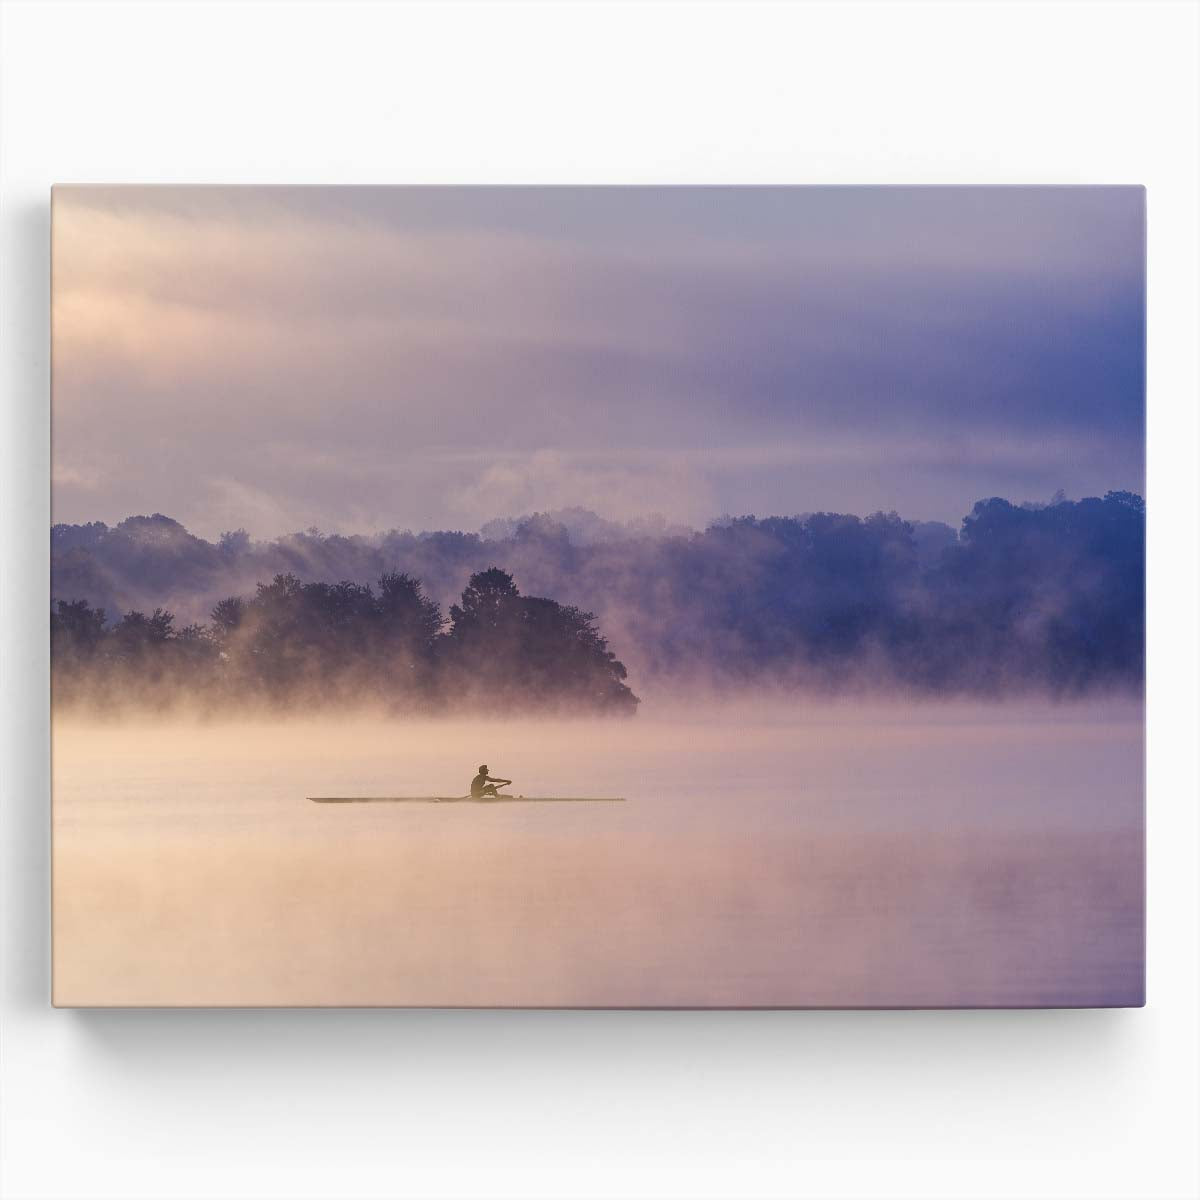 Foggy Dawn Kayaking at Marsh Creek Wall Art by Luxuriance Designs. Made in USA.